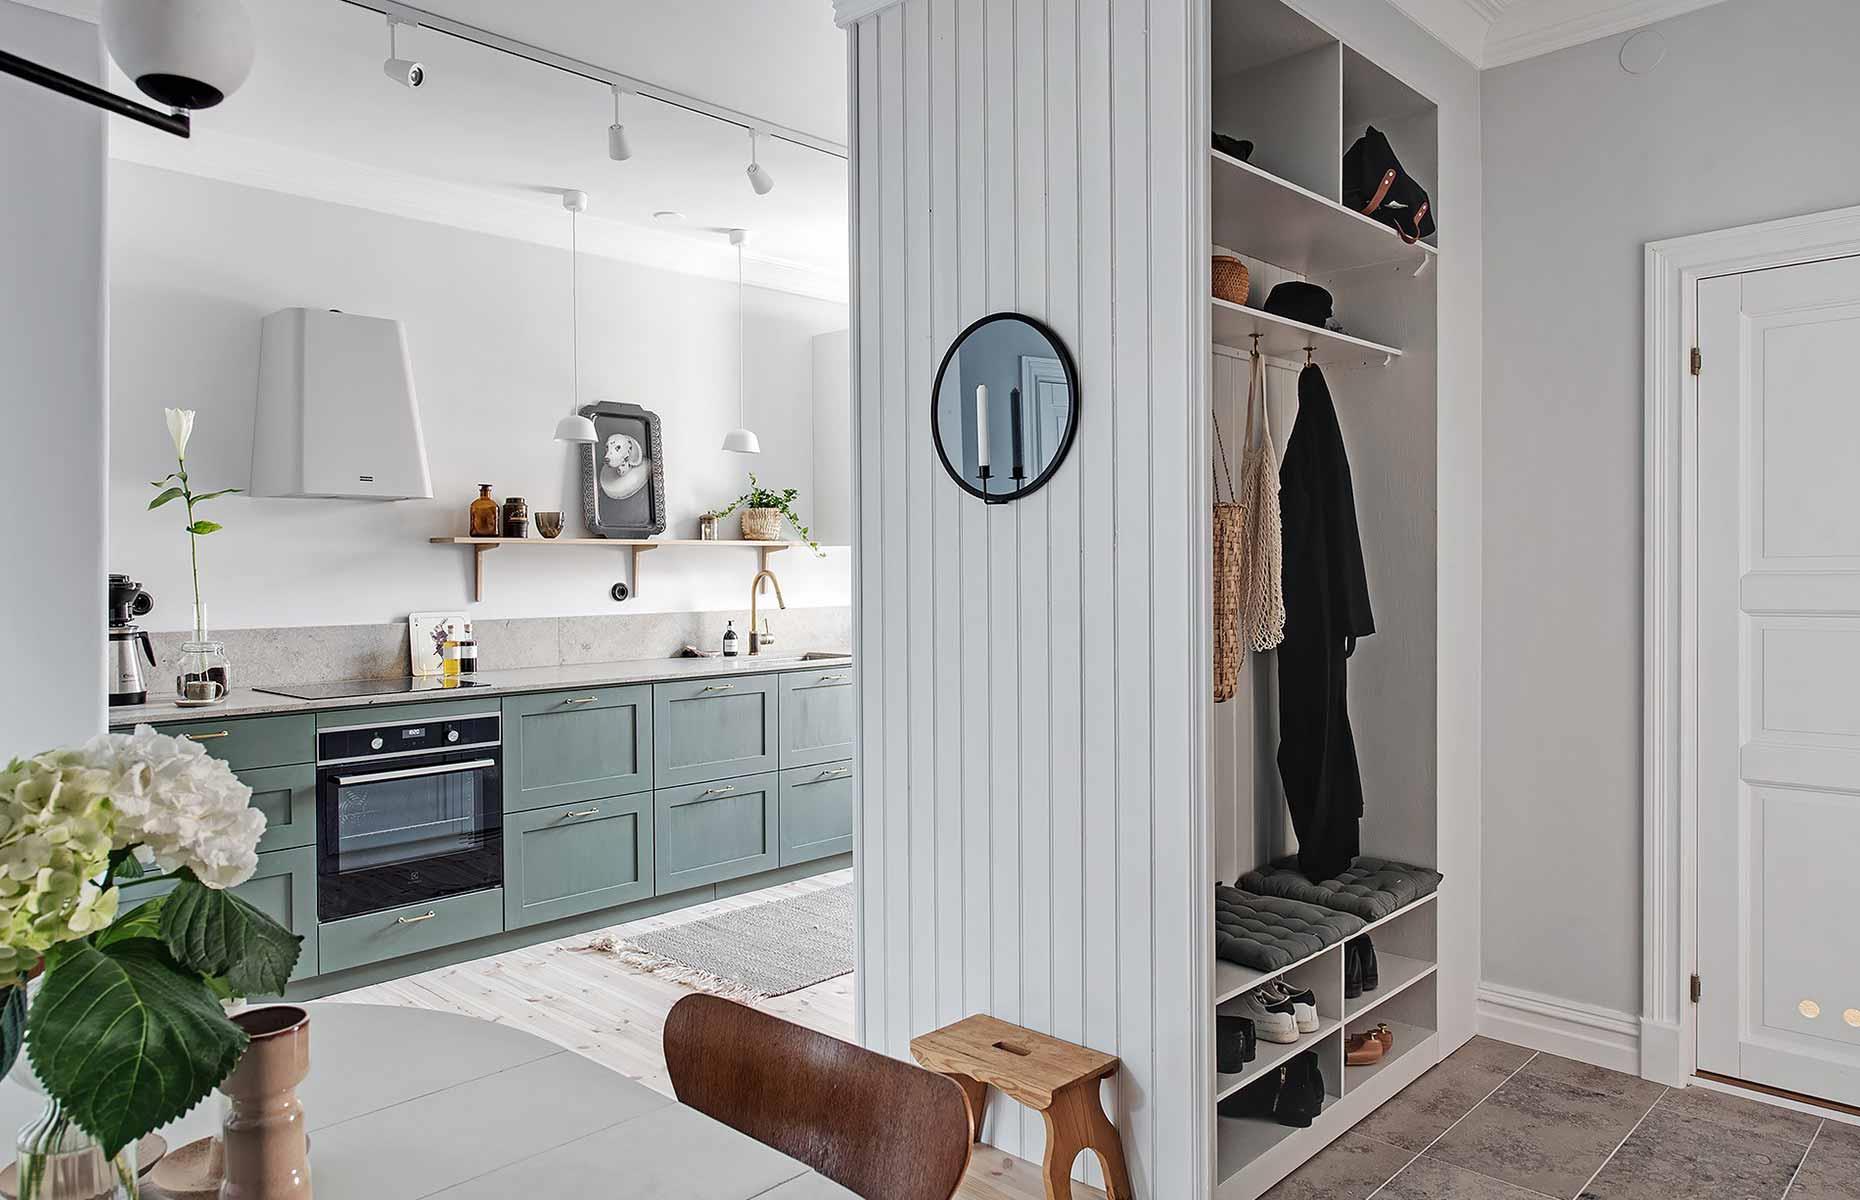 <p>Don’t be afraid of squeezing more functional zones into your open-concept layout. This <a href="https://www.loveproperty.com/gallerylist/97075/smart-room-dividers-that-break-new-boundaries">compact room divider</a> has been fitted with coat hooks and shoe cubbies, as well as higher shelves for bags and accessories. Not only does it add valuable storage space, but it helps define the transition between the kitchen and dining area in this snug multipurpose room too.</p>